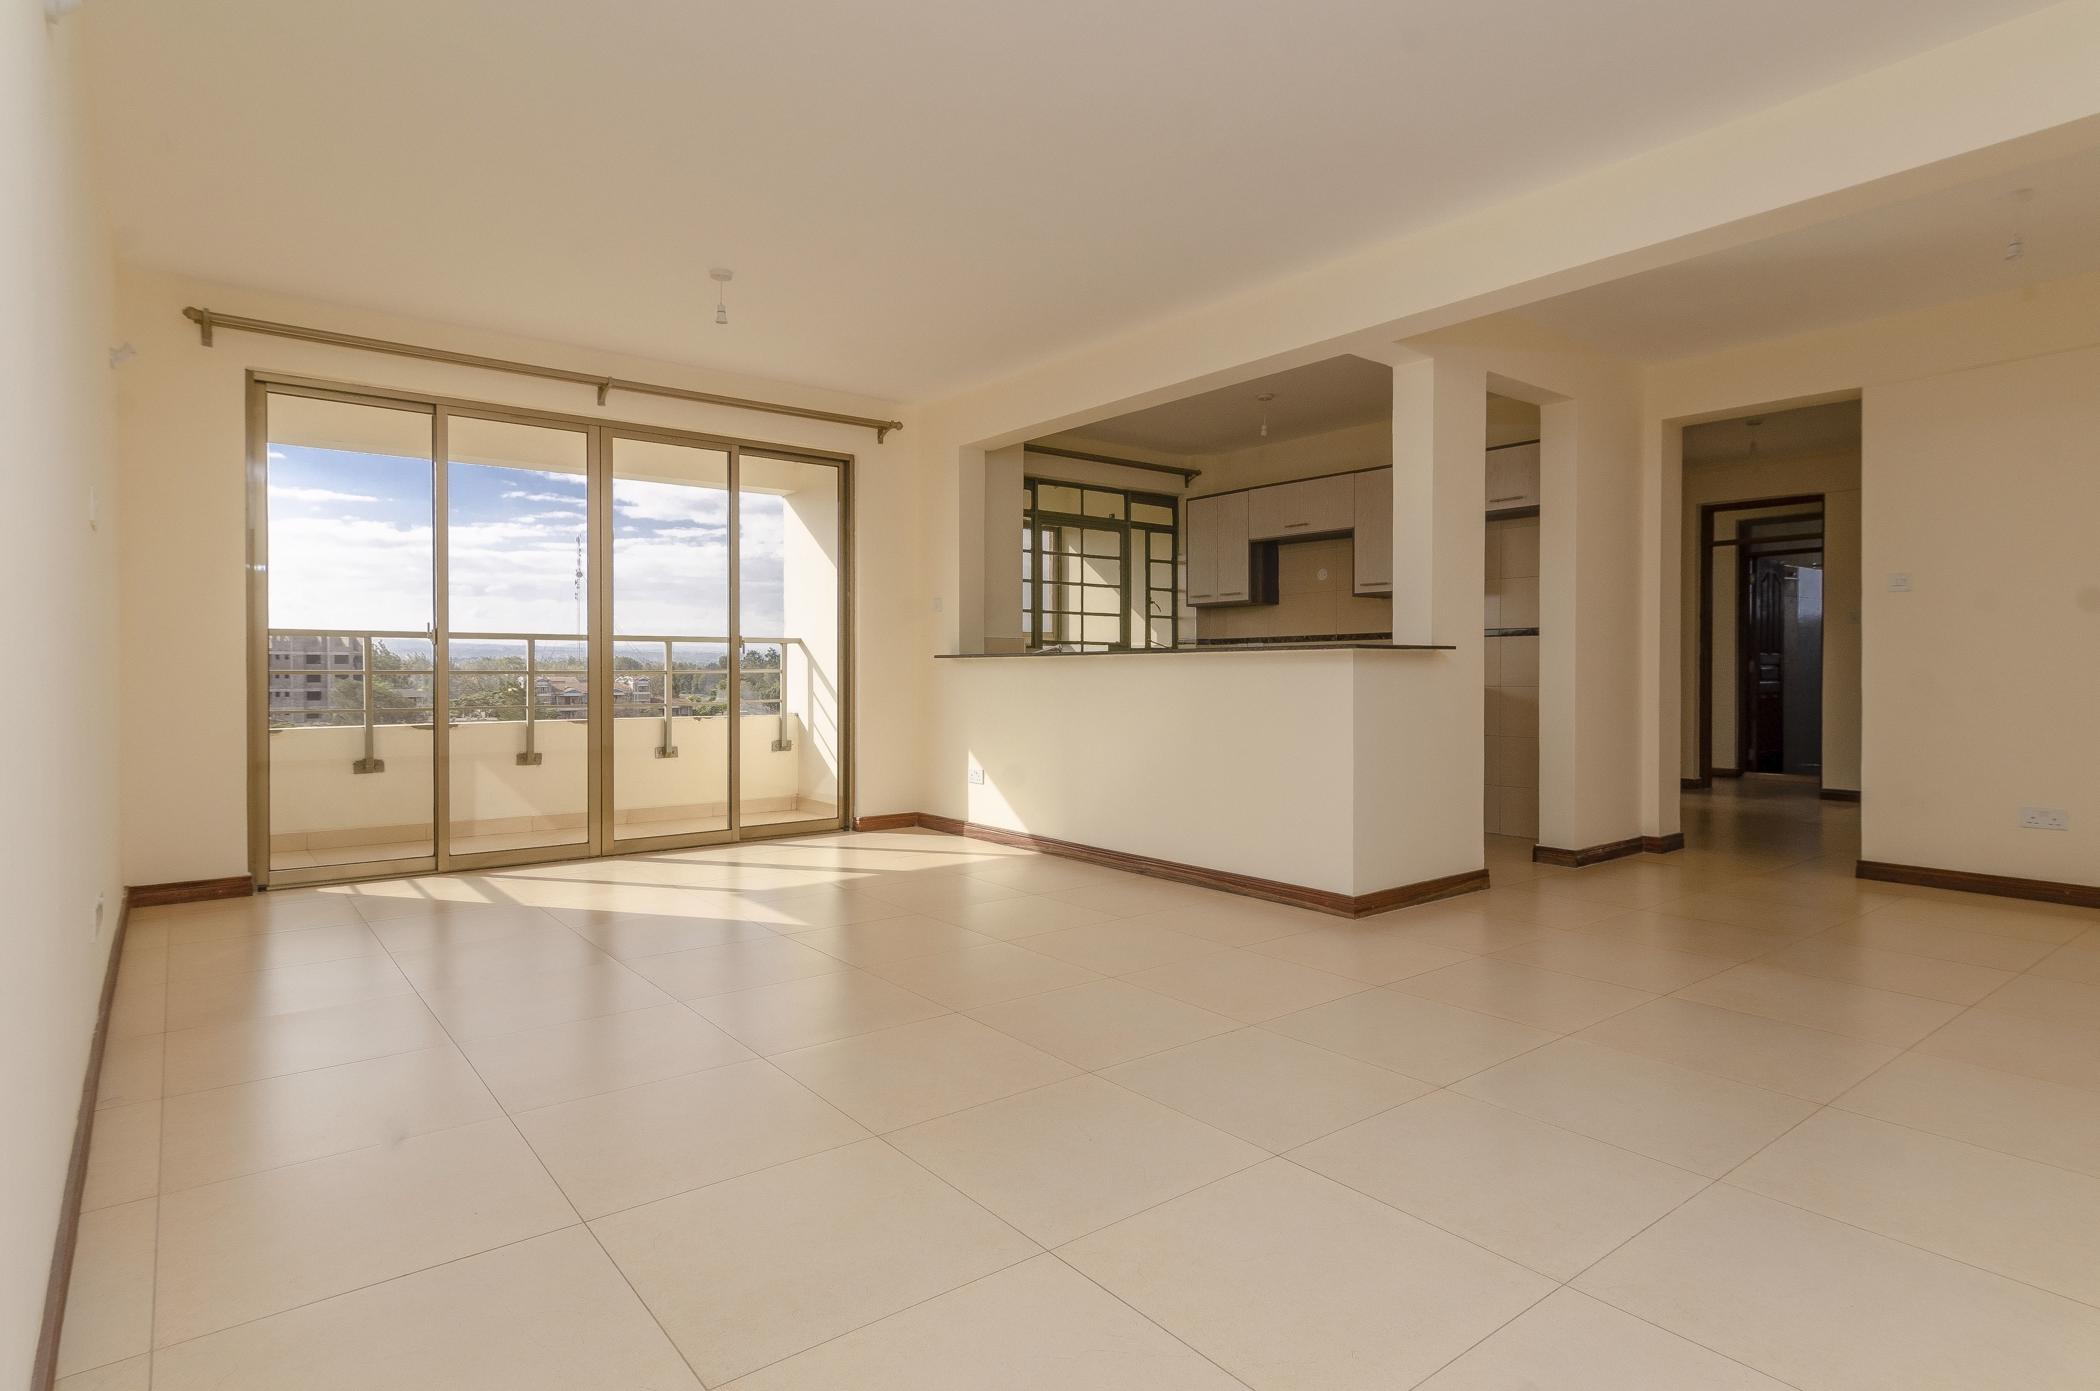 4 bedroom apartment for sale in Thome (Kenya)